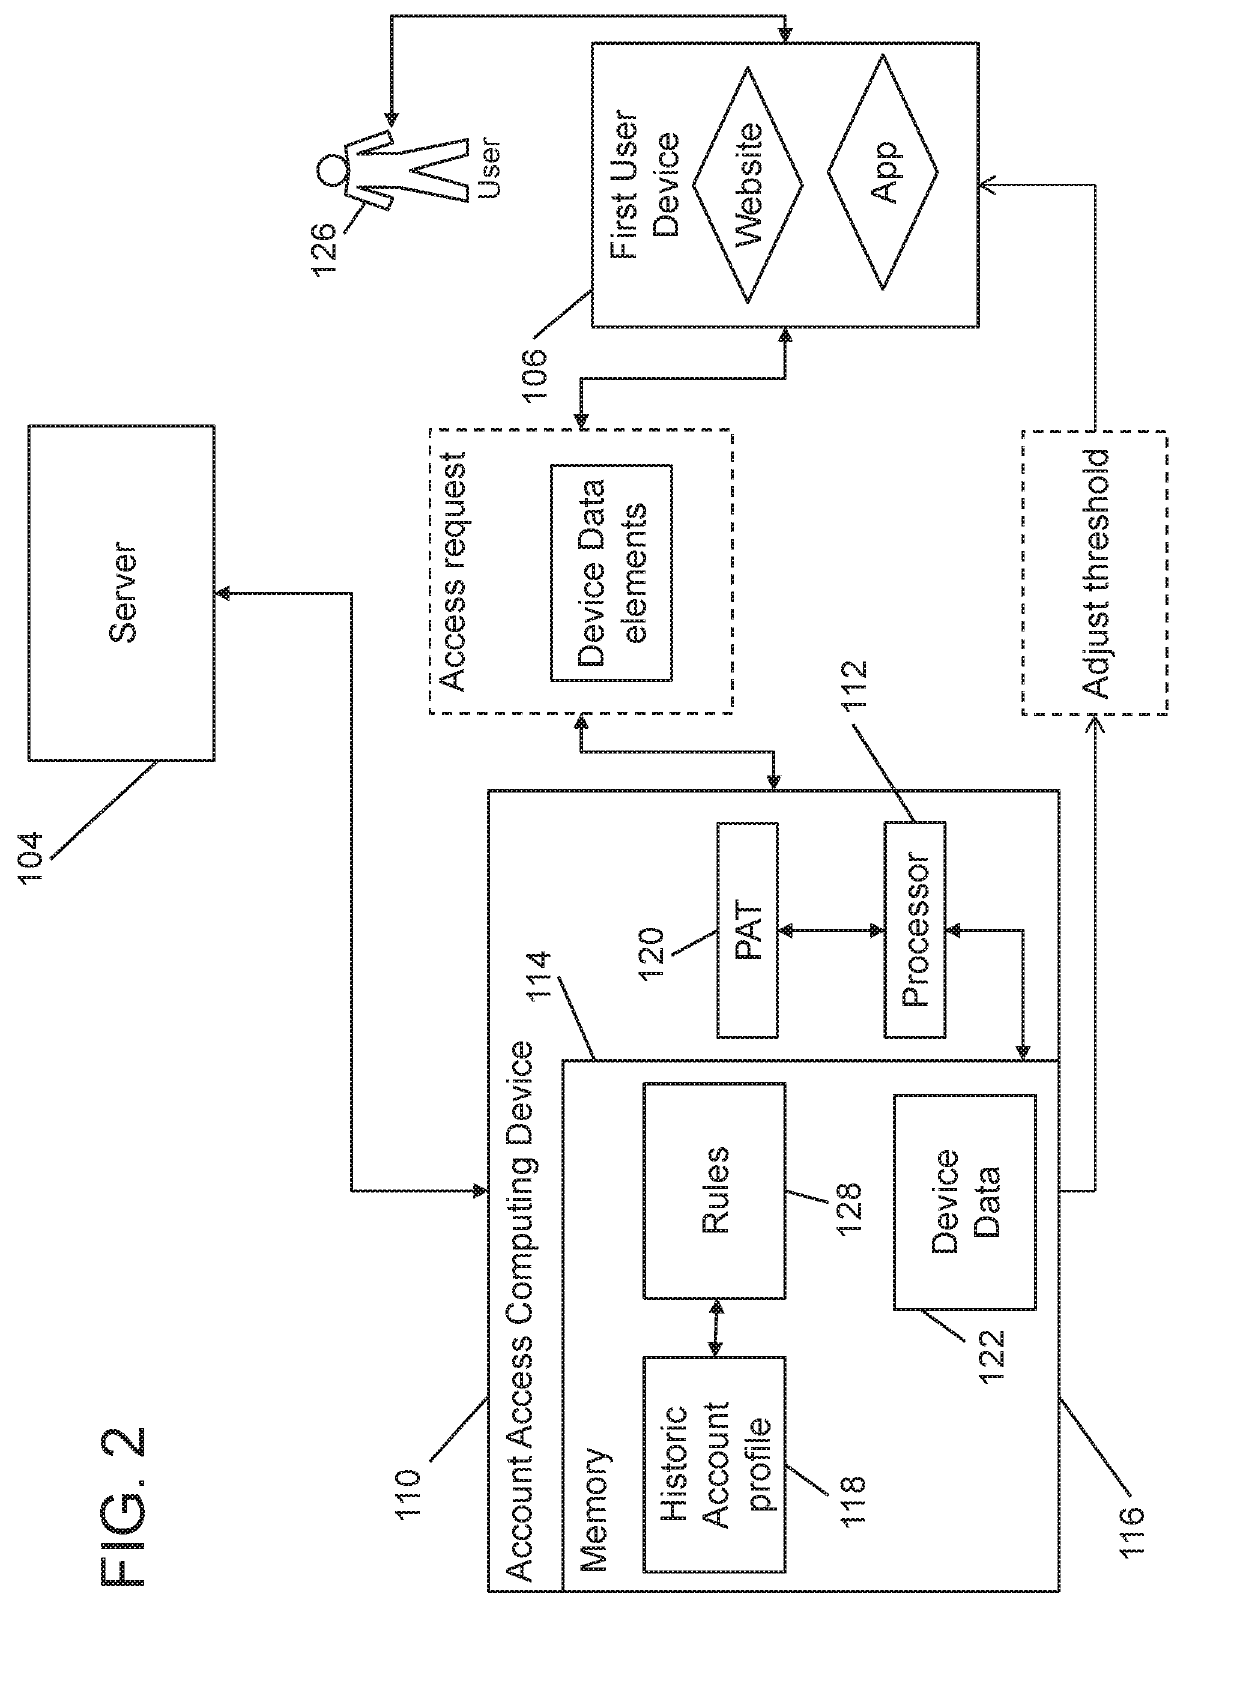 Systems and methods for dynamically adjusting a password attempt threshold